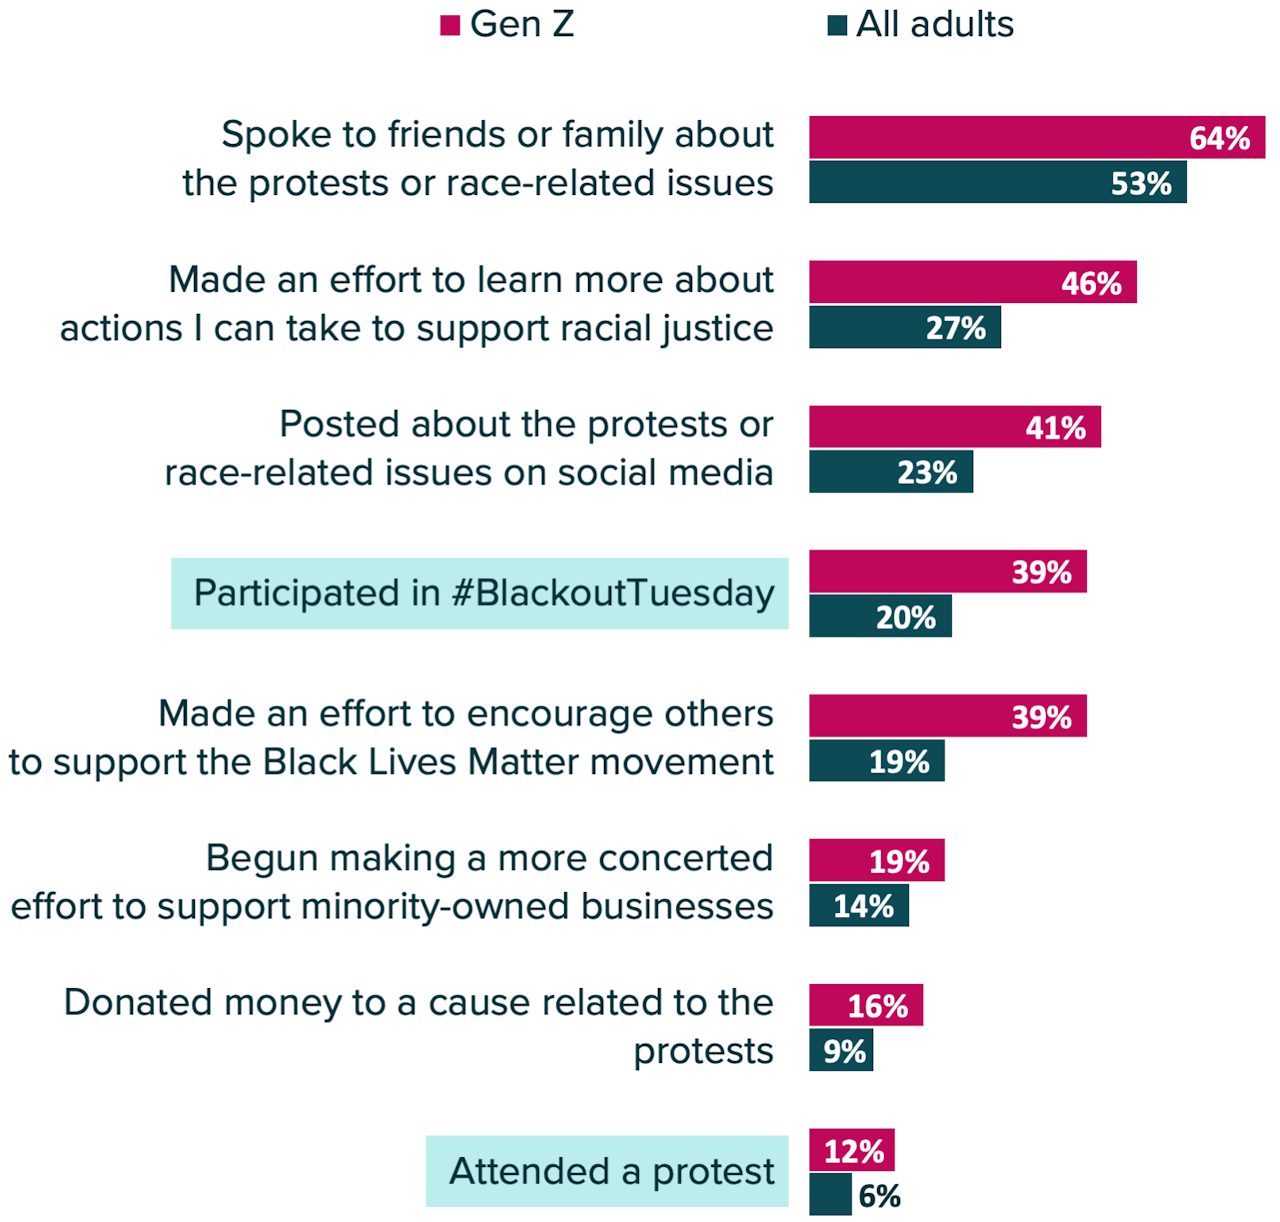 12% of Gen Z Attended a Recent Protest and 39% Participated in #BlackOutTuesday